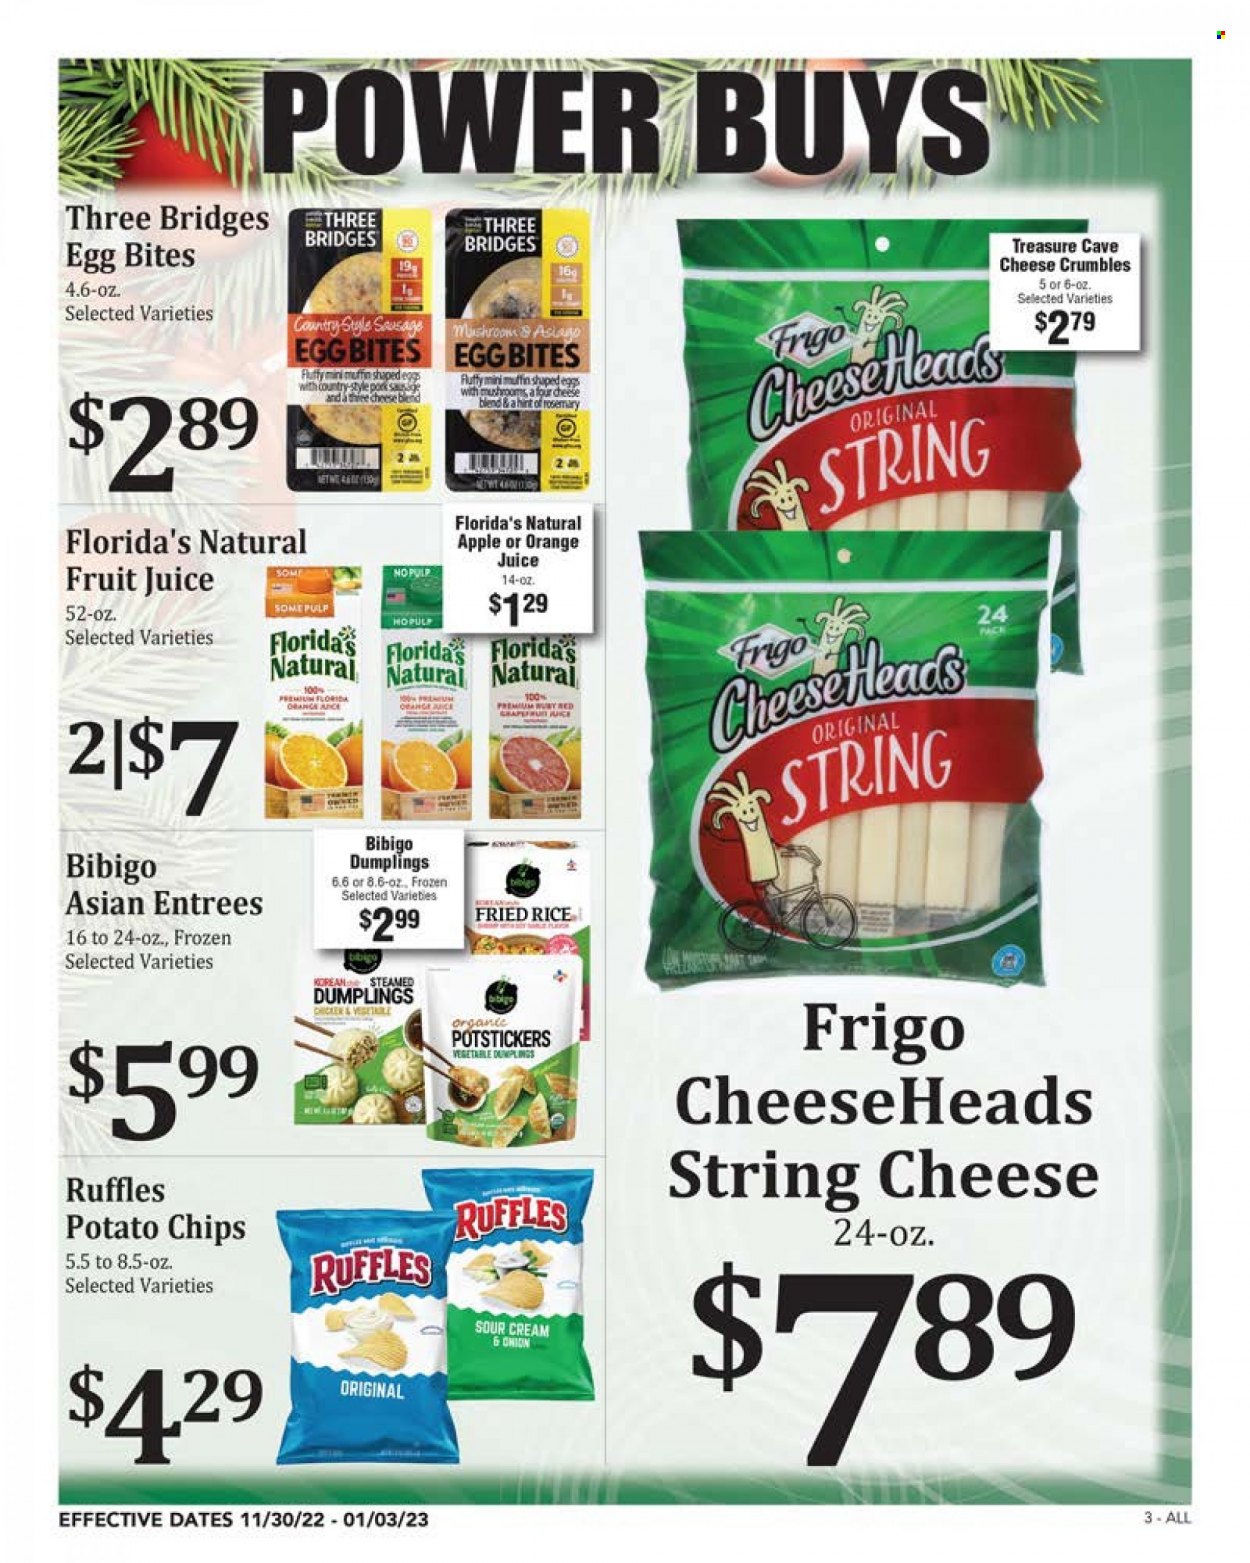 thumbnail - Rosauers Flyer - 11/30/2022 - 01/03/2023 - Sales products - mushrooms, muffin, dumplings, sausage, string cheese, cheese, cheese crumbles, eggs, Florida's Natural, potato chips, Ruffles, rosemary, orange juice, juice, fruit juice, pet bed. Page 3.